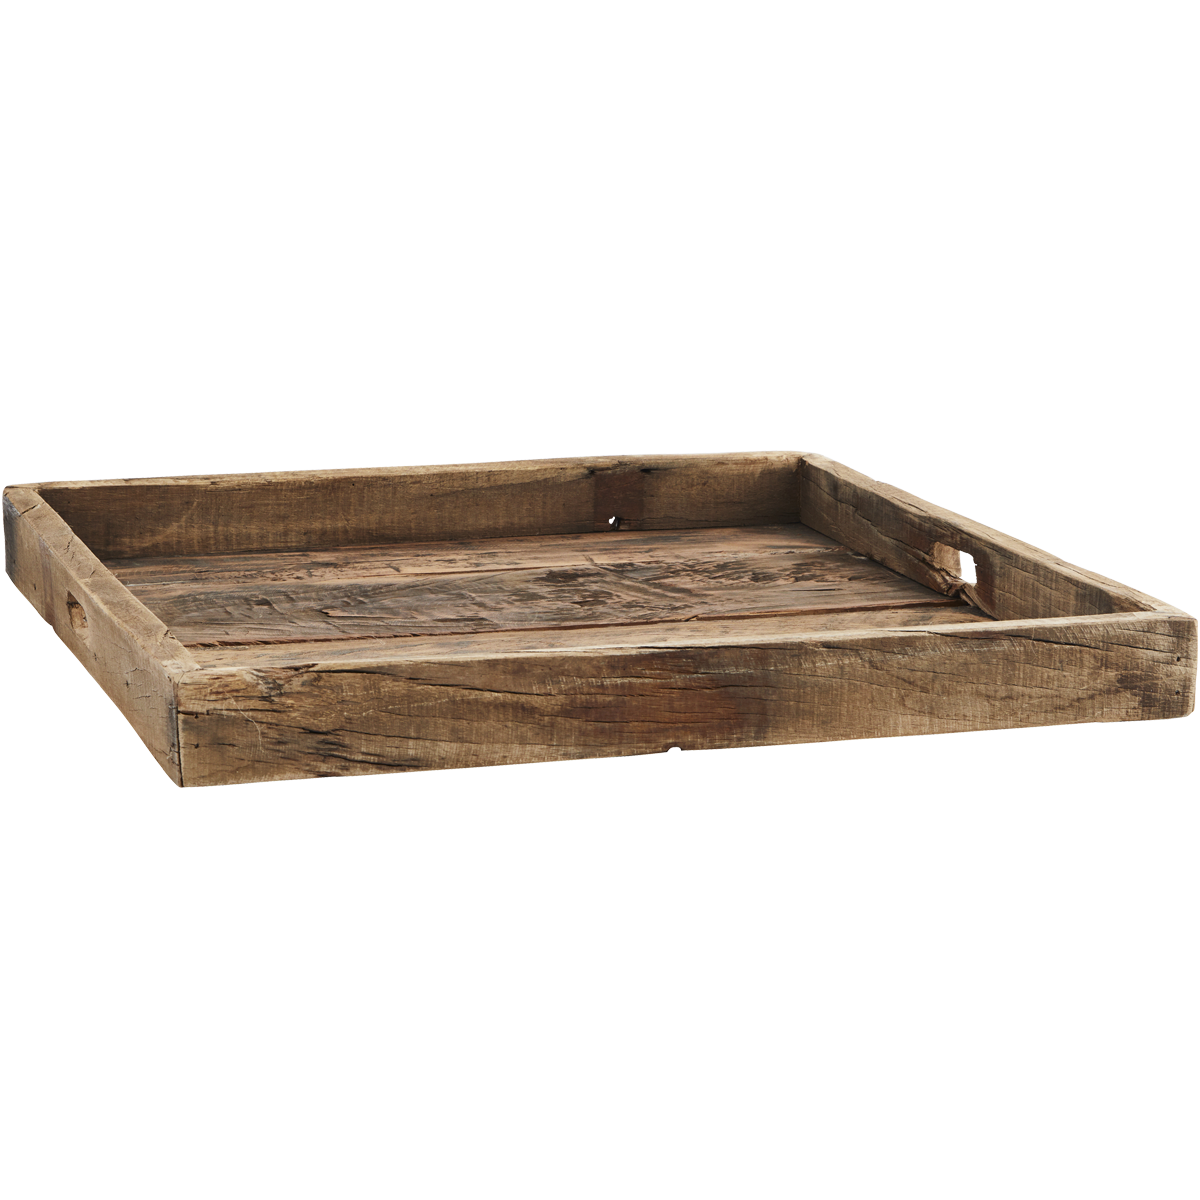 Recycled wooden tray